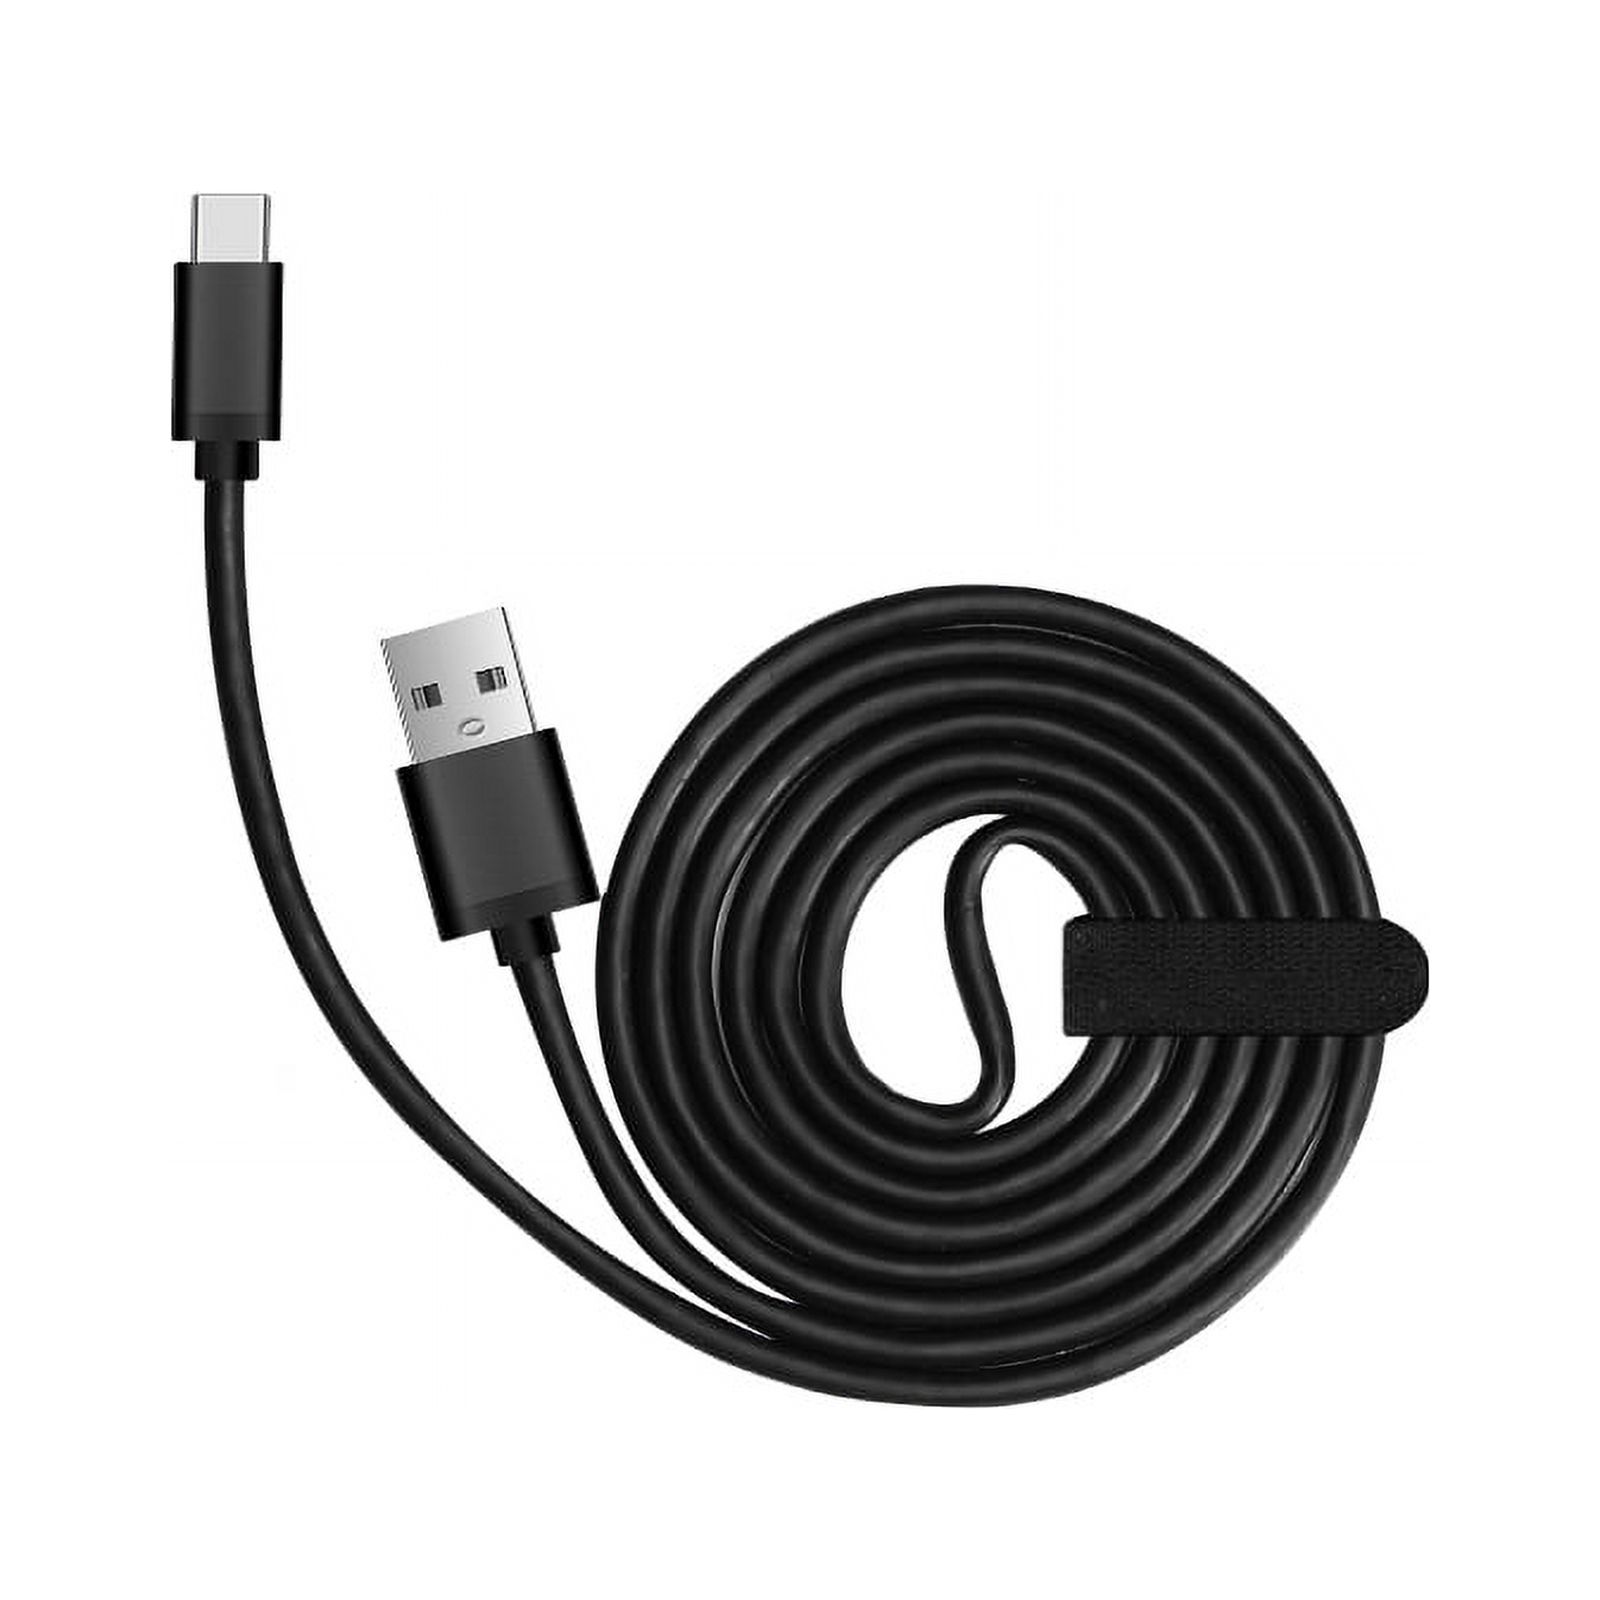 Type-C USB Data/Charger Cable for Motorola Moto G20, G40 Fusion, G50, G100 - image 2 of 4